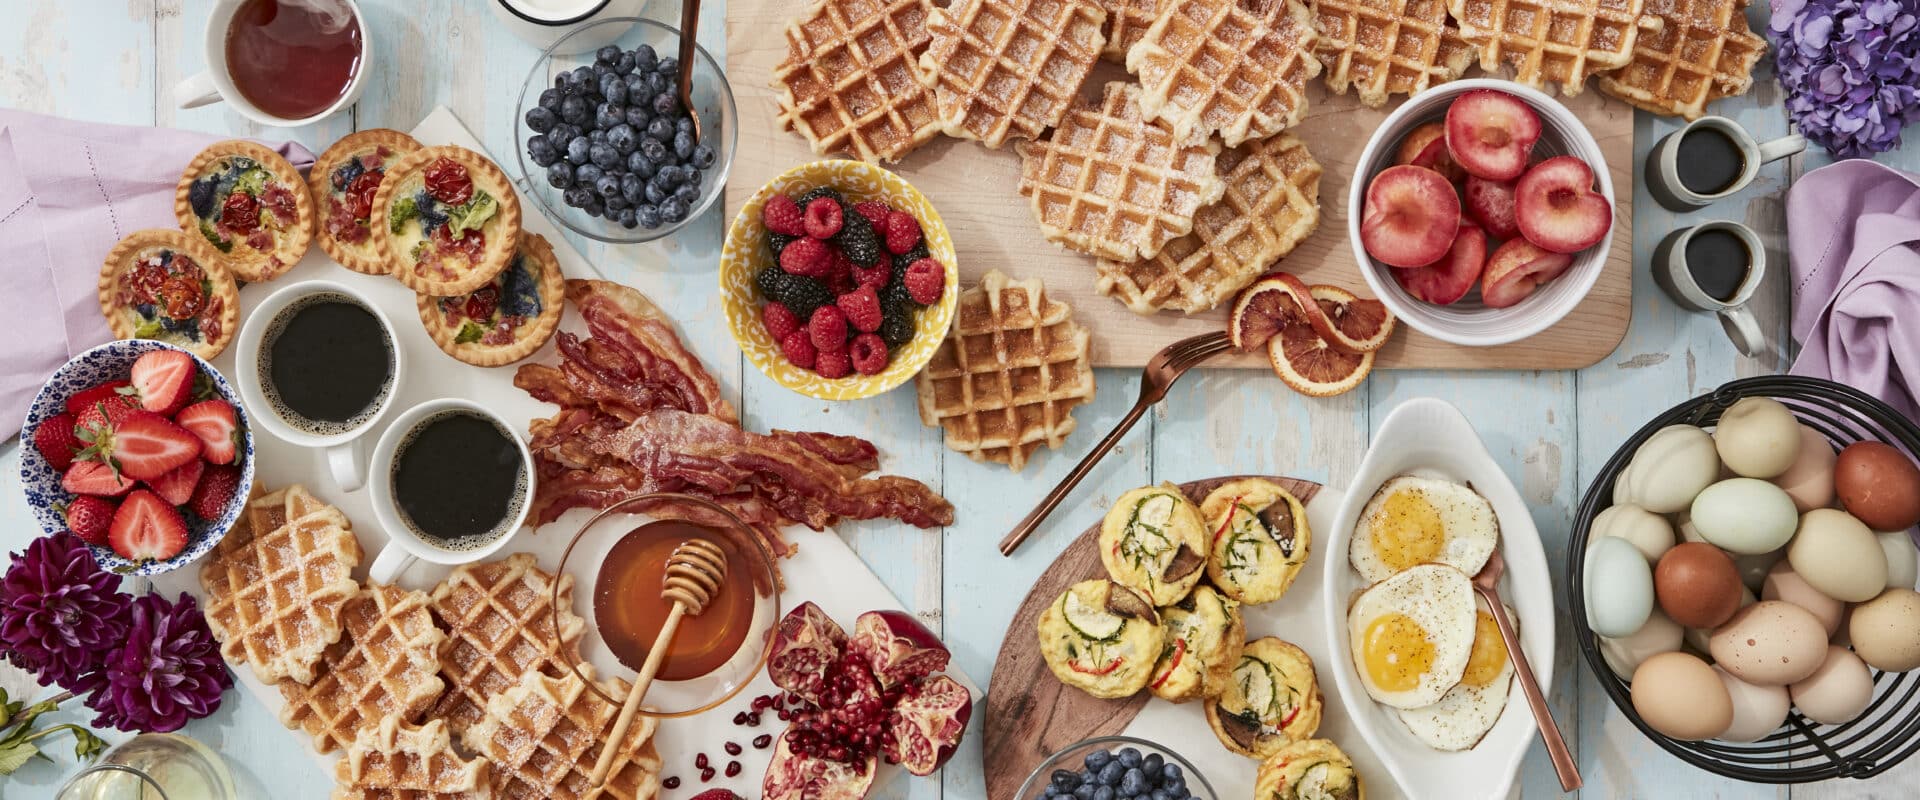 Waffle Bar Station NYC Catering